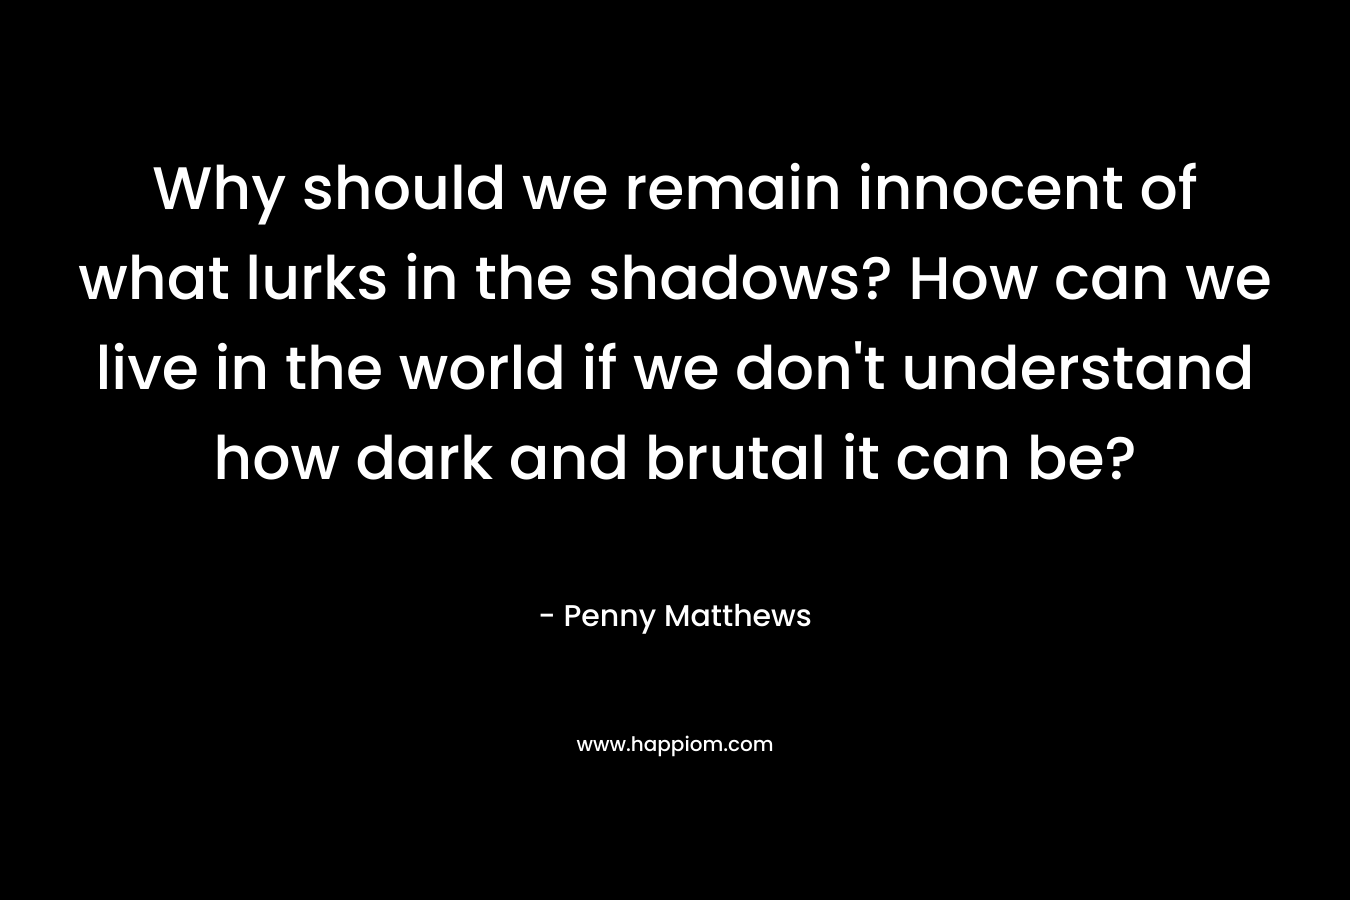 Why should we remain innocent of what lurks in the shadows? How can we live in the world if we don’t understand how dark and brutal it can be? – Penny Matthews